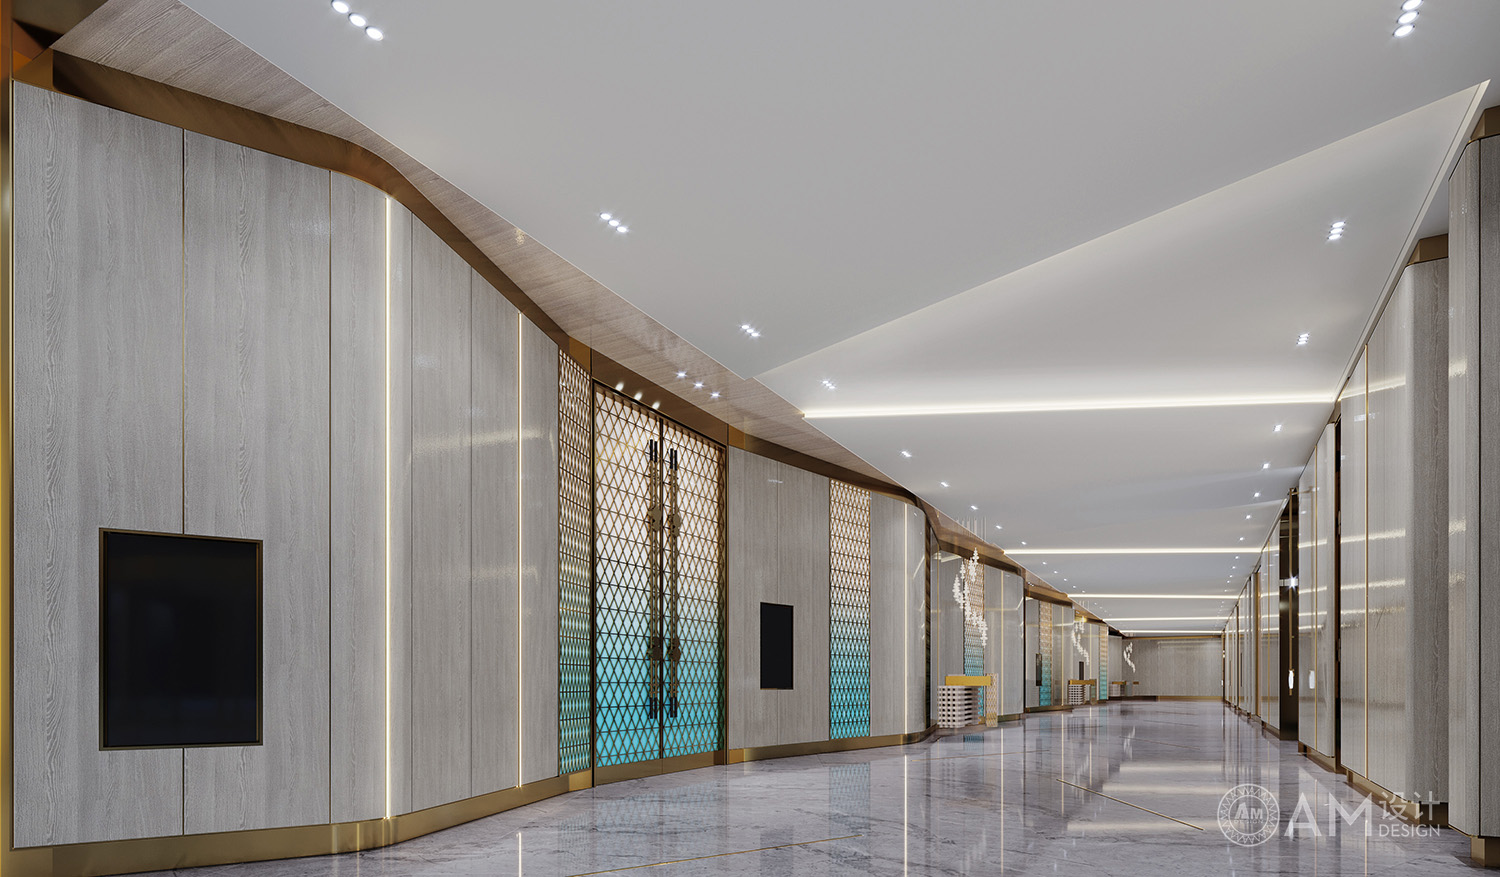 AM DESIGN | Design of the corridor of Liaoning grand beauty Hotel